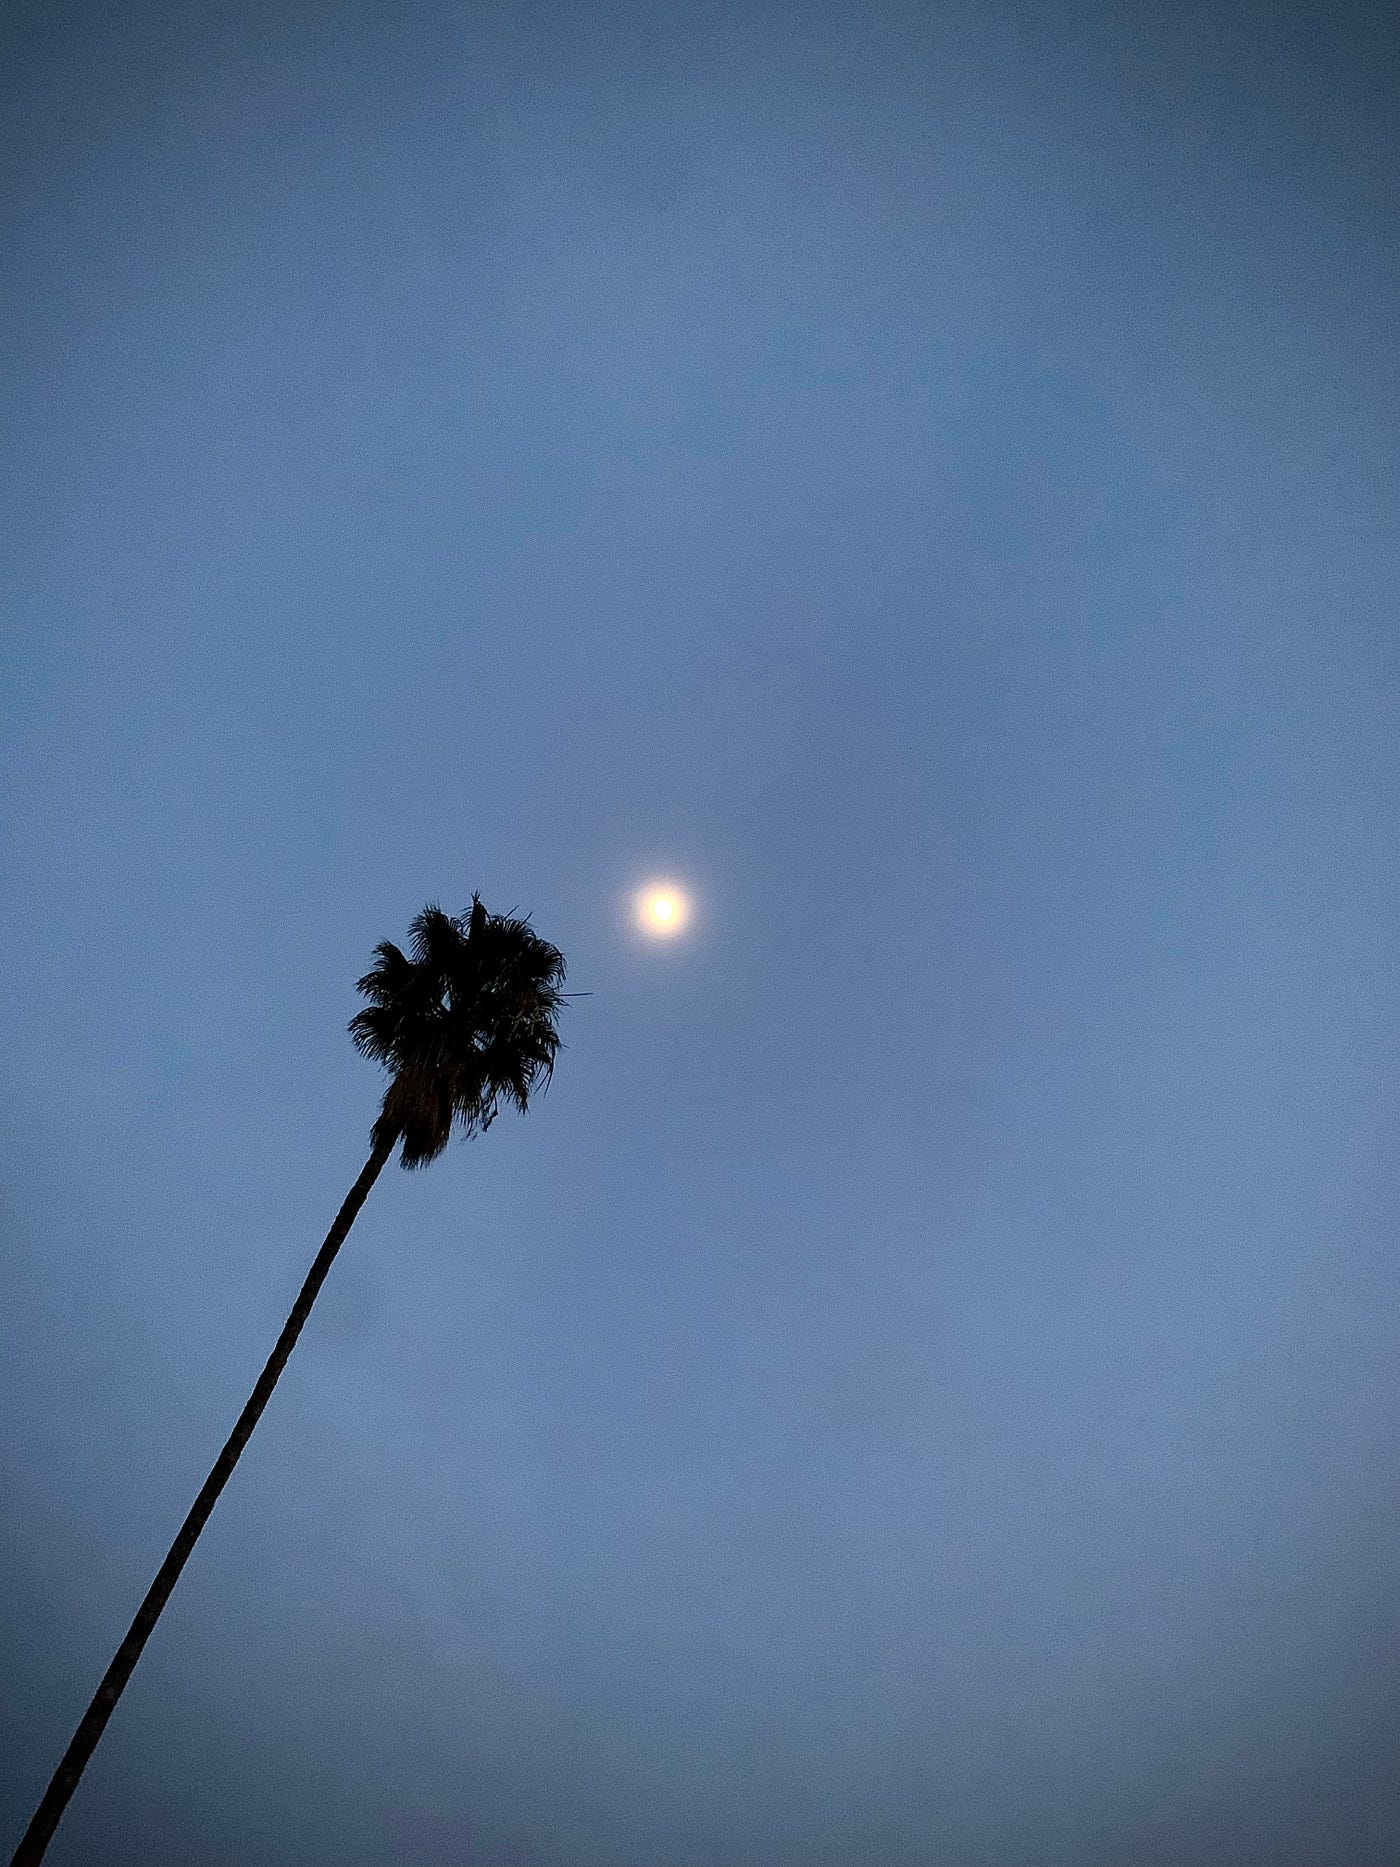 View of a single palm tree under the moon in L.A. in January 2022.